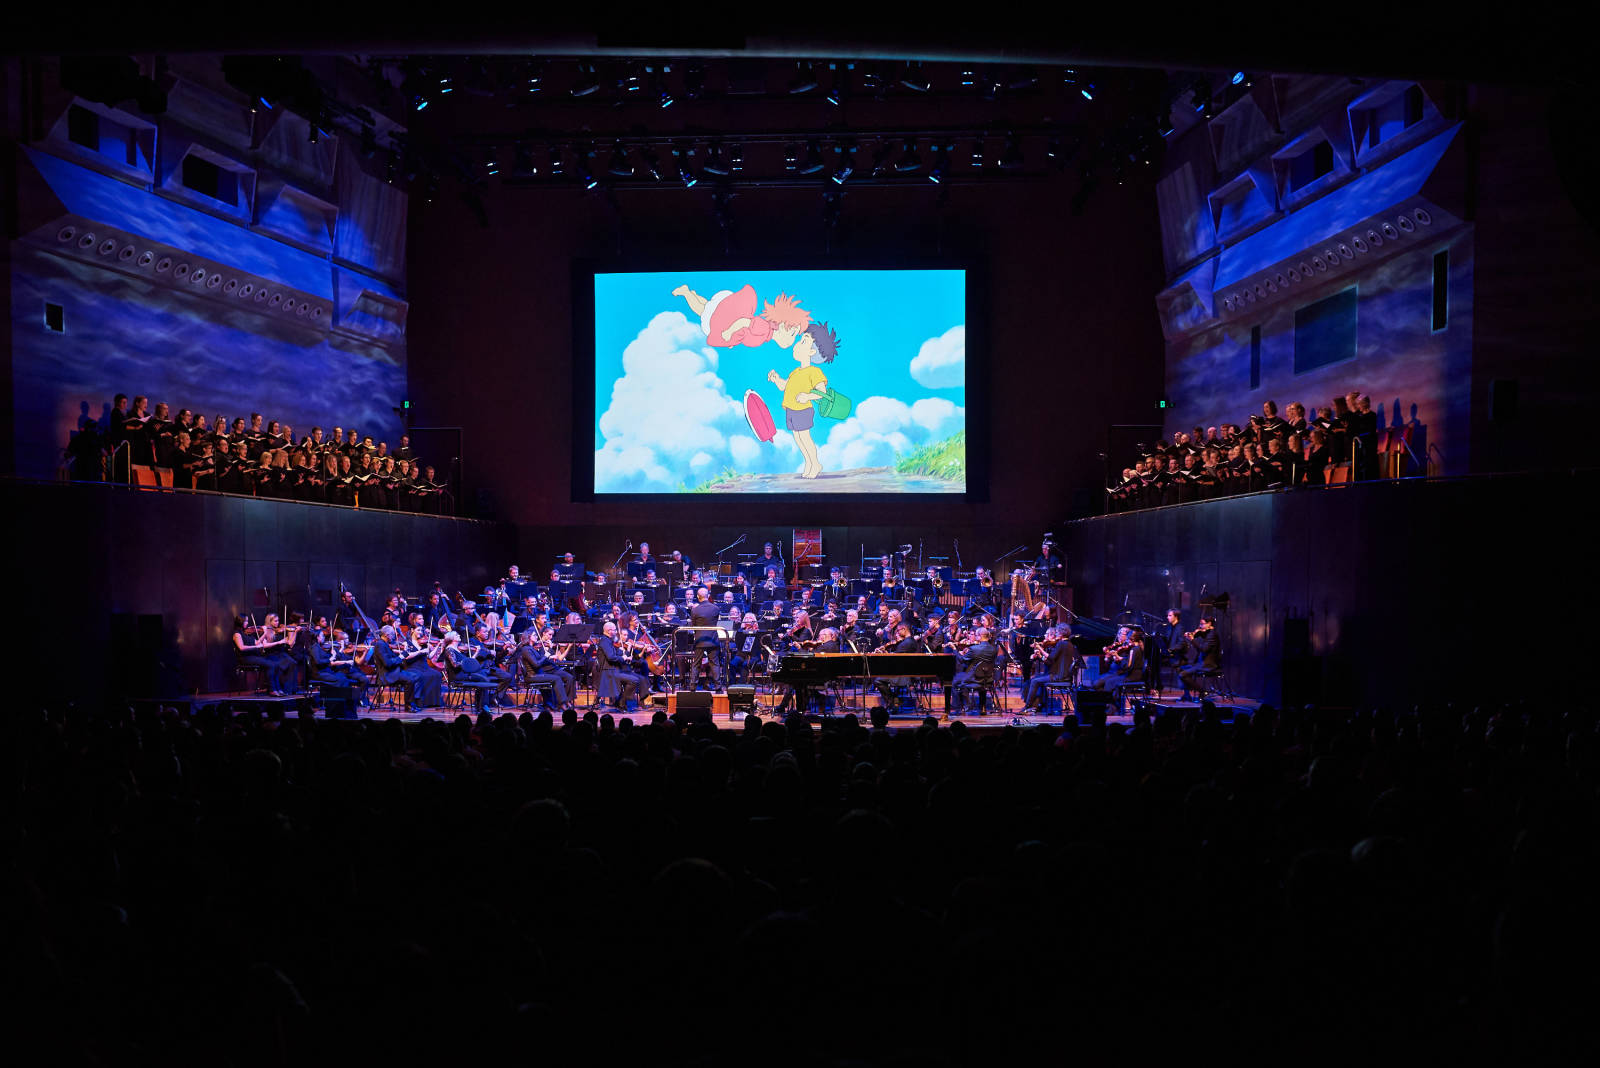 Joe Hisaishi Symphonic Concert: Music from the Studio Ghibli Films of Hayao Miyazaki - Live-To-Picture Concert Events